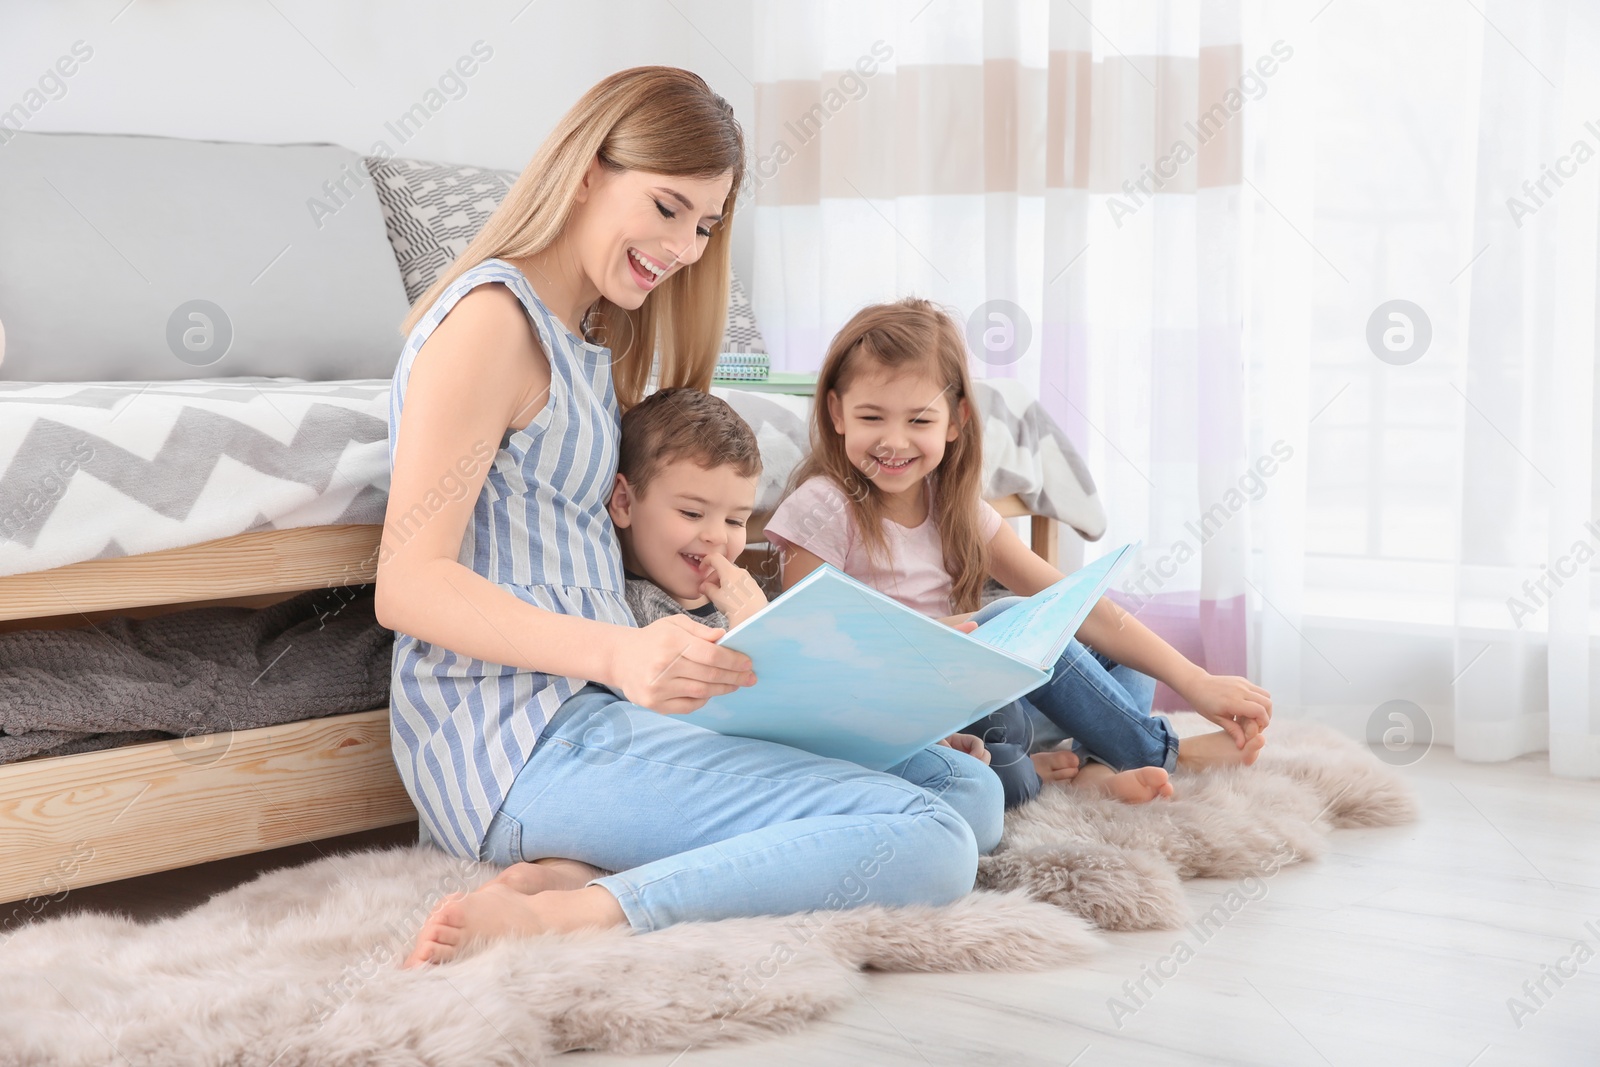 Photo of Nanny reading book to little children at home